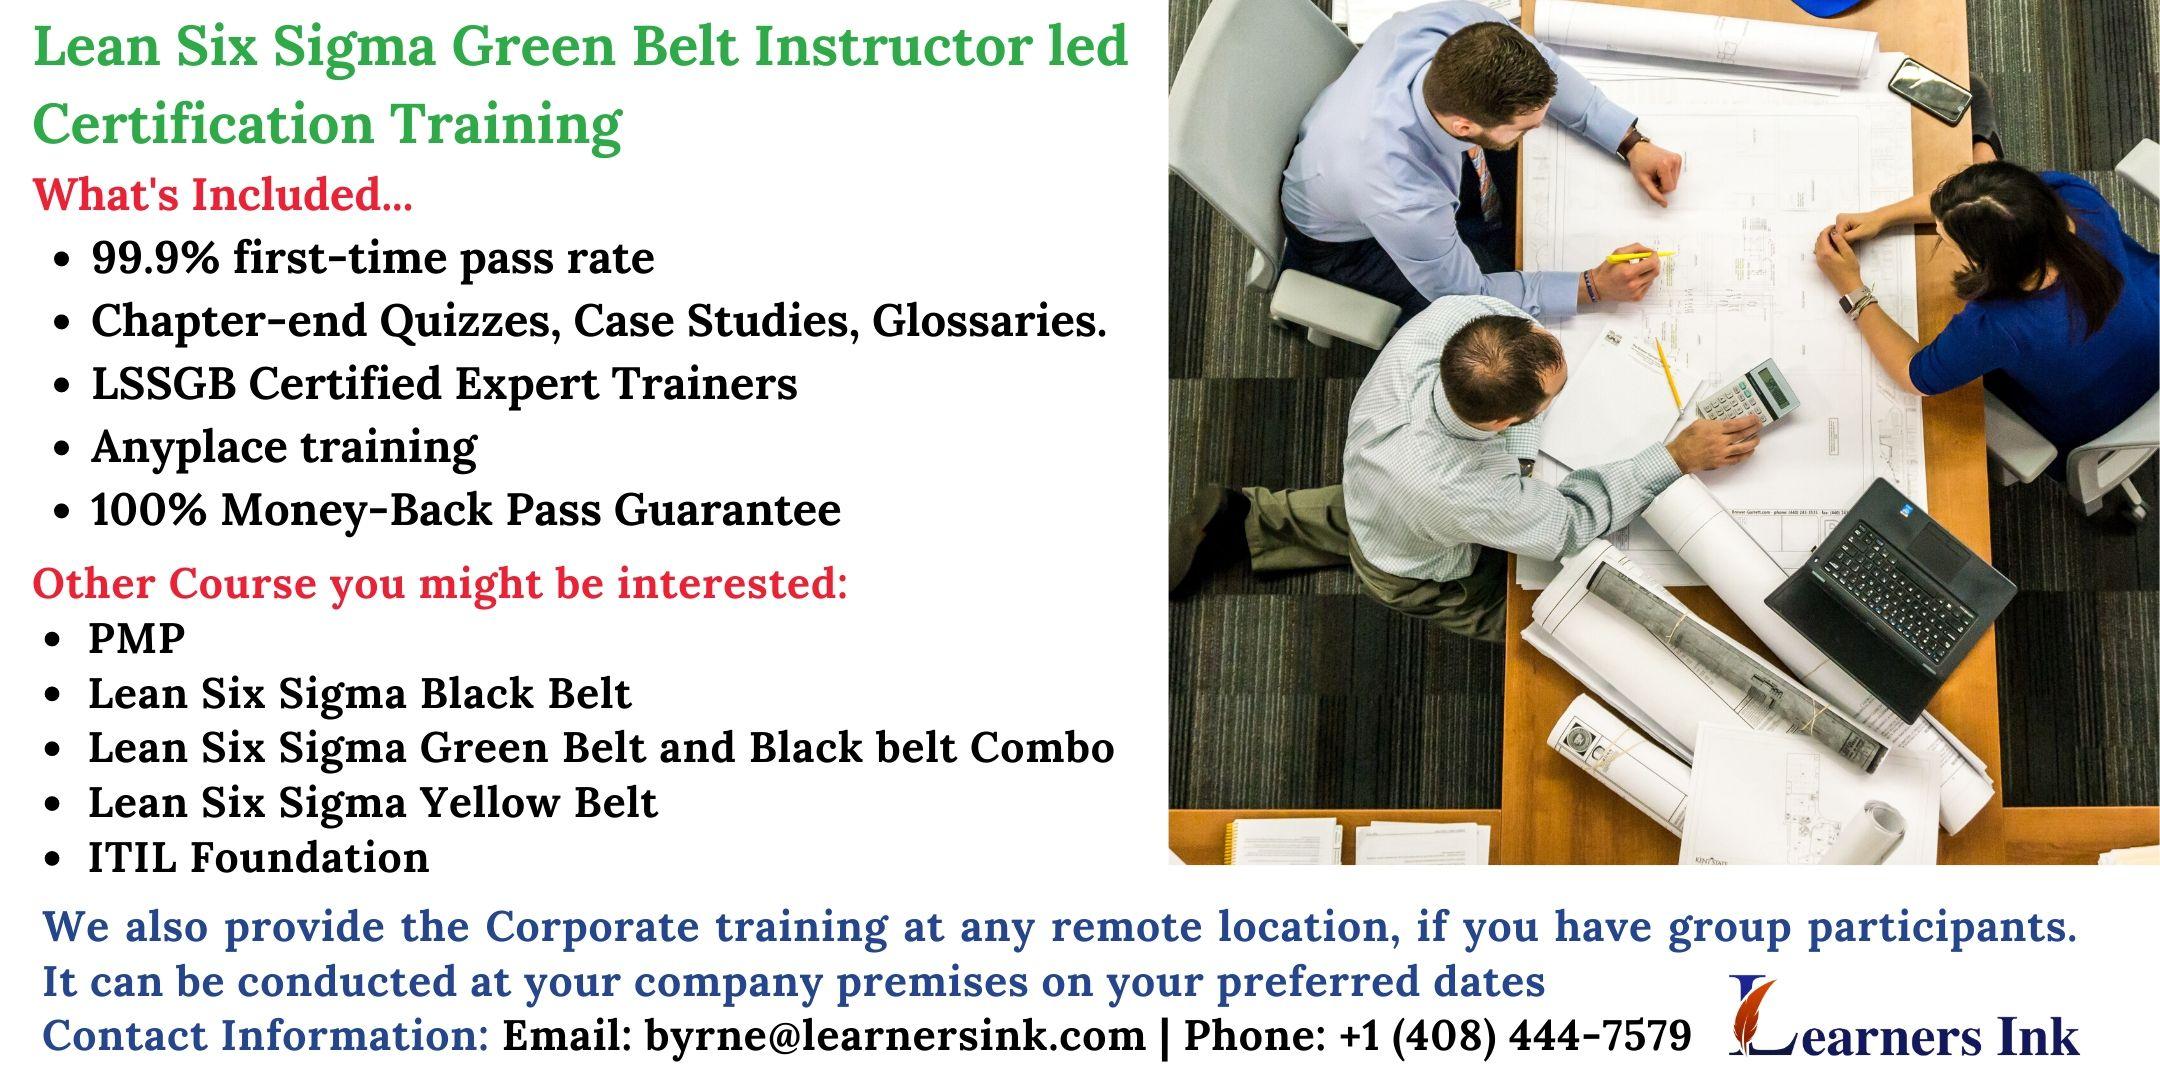 Lean Six Sigma Green Belt Certification Training Course (LSSGB) in Evansville